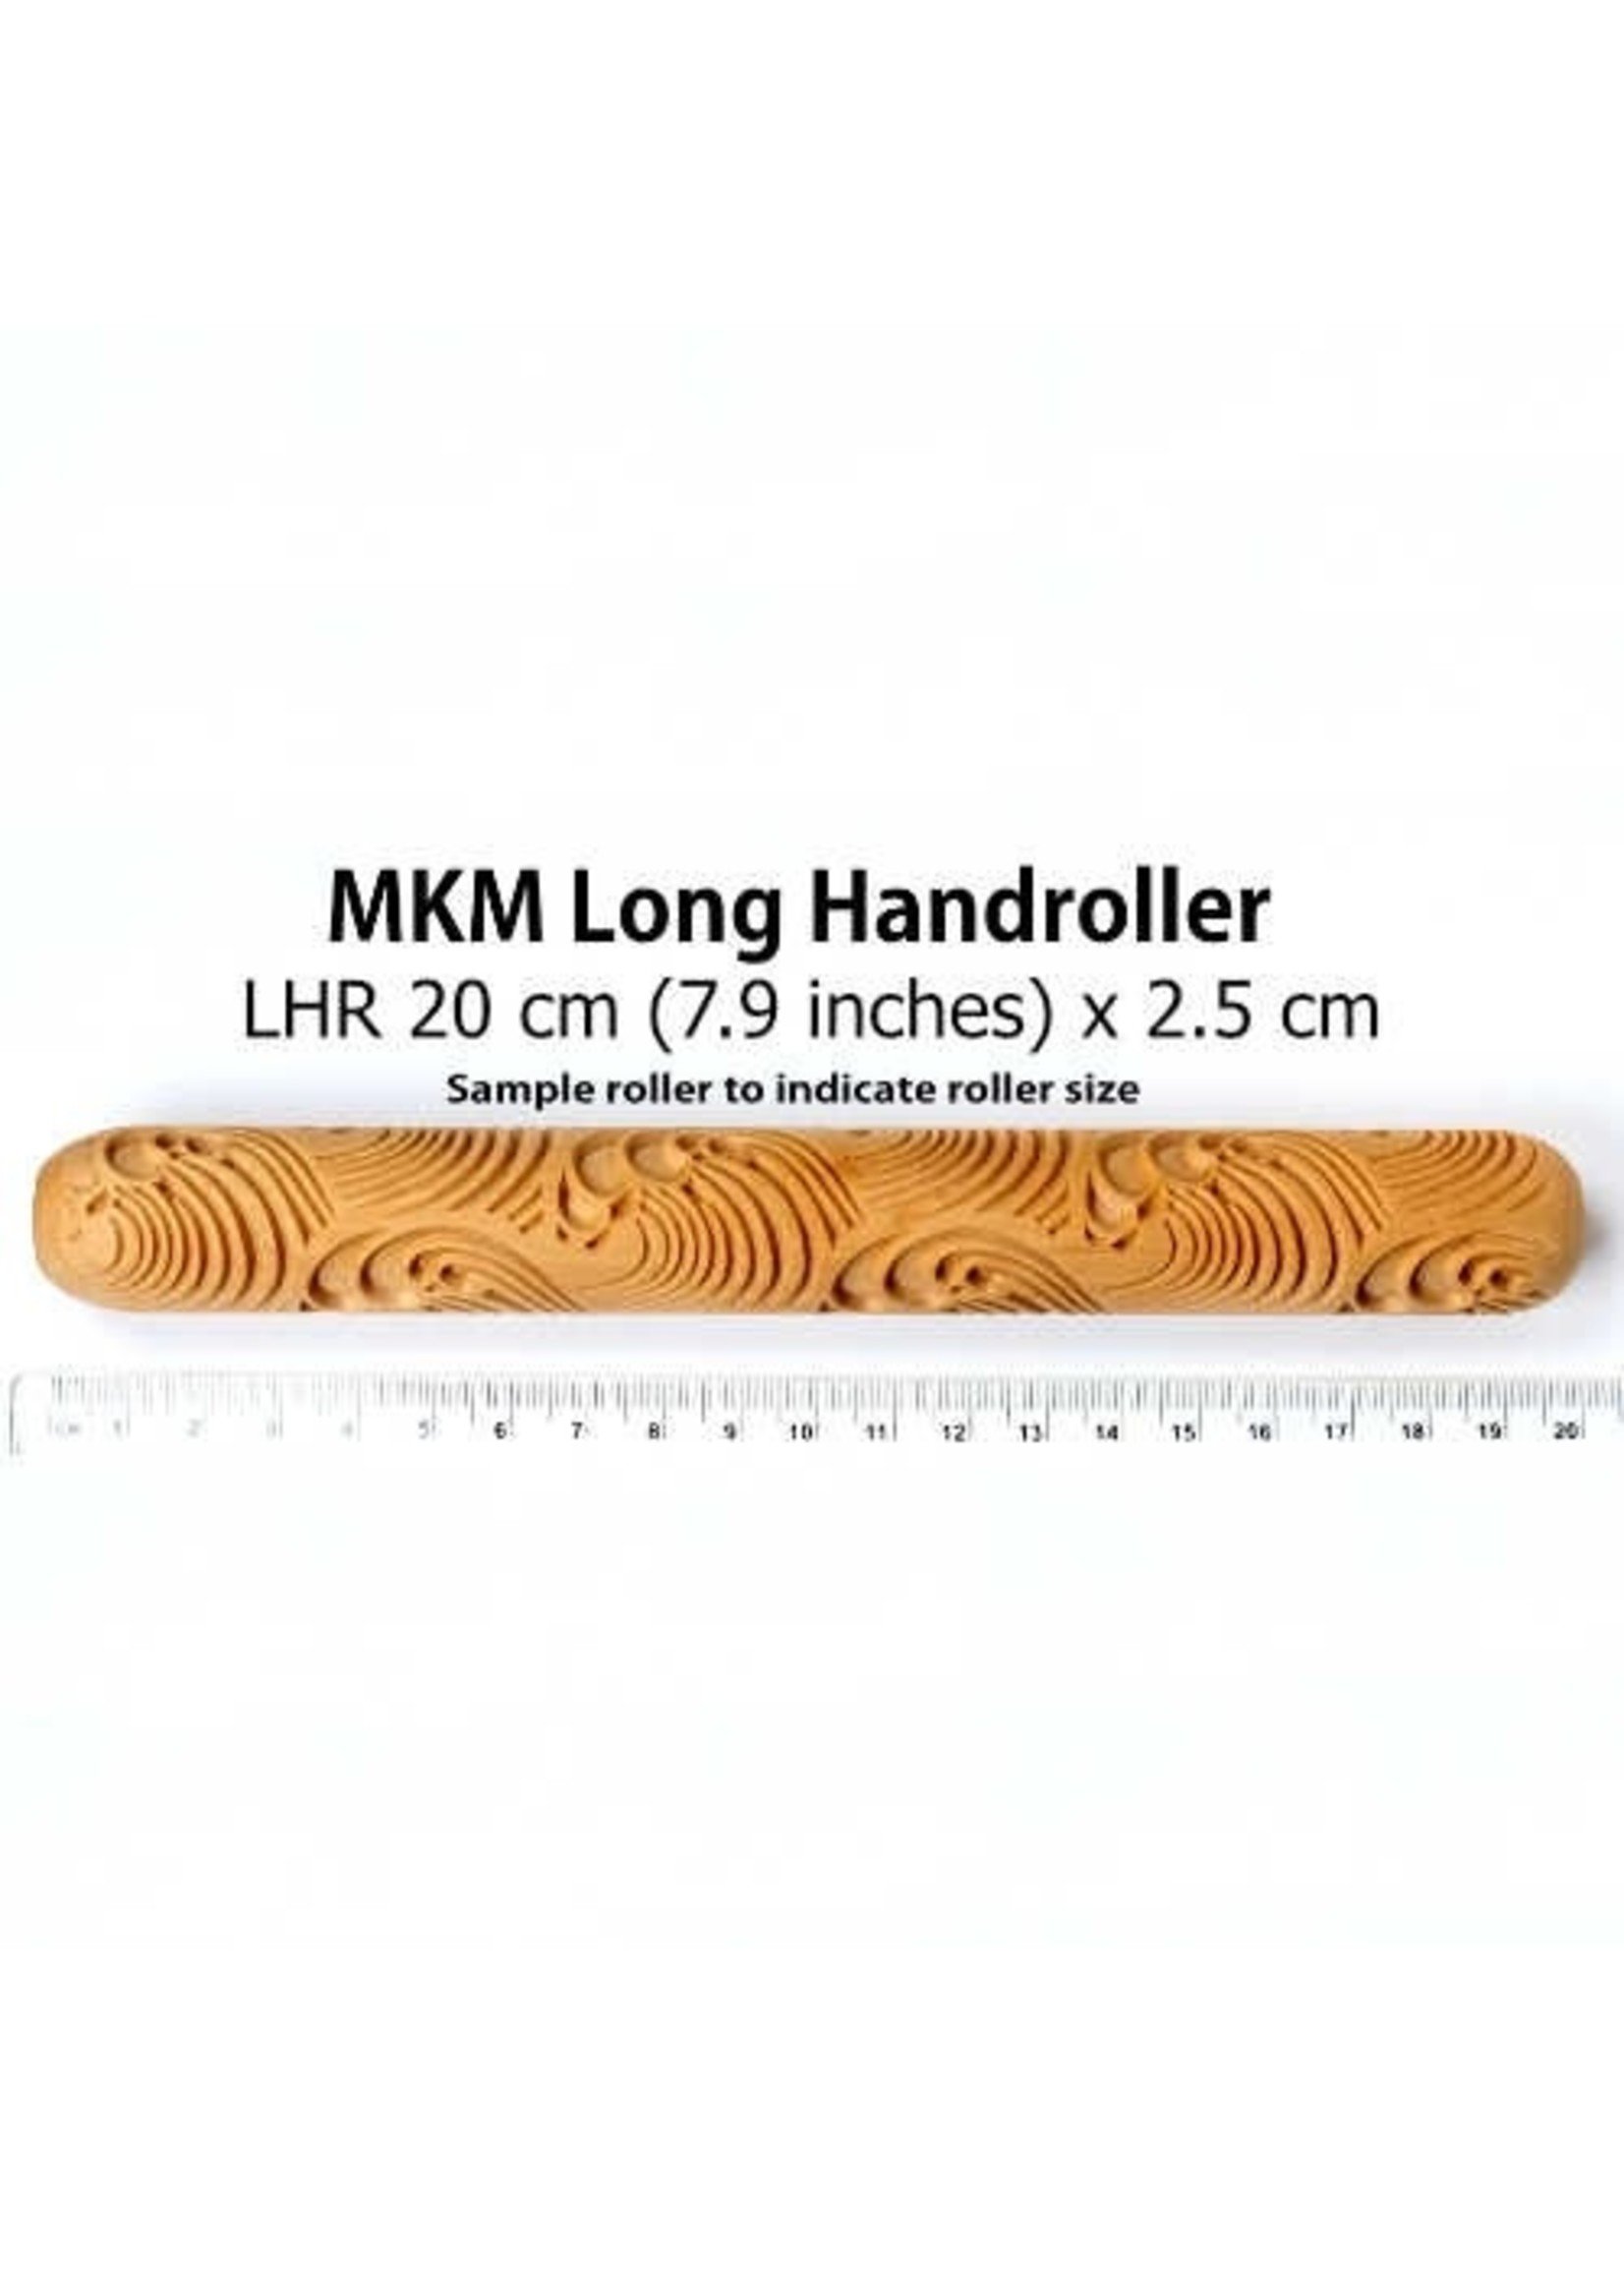 MKM Pottery Tools 12 cm Big Hand Roller Texture Roller